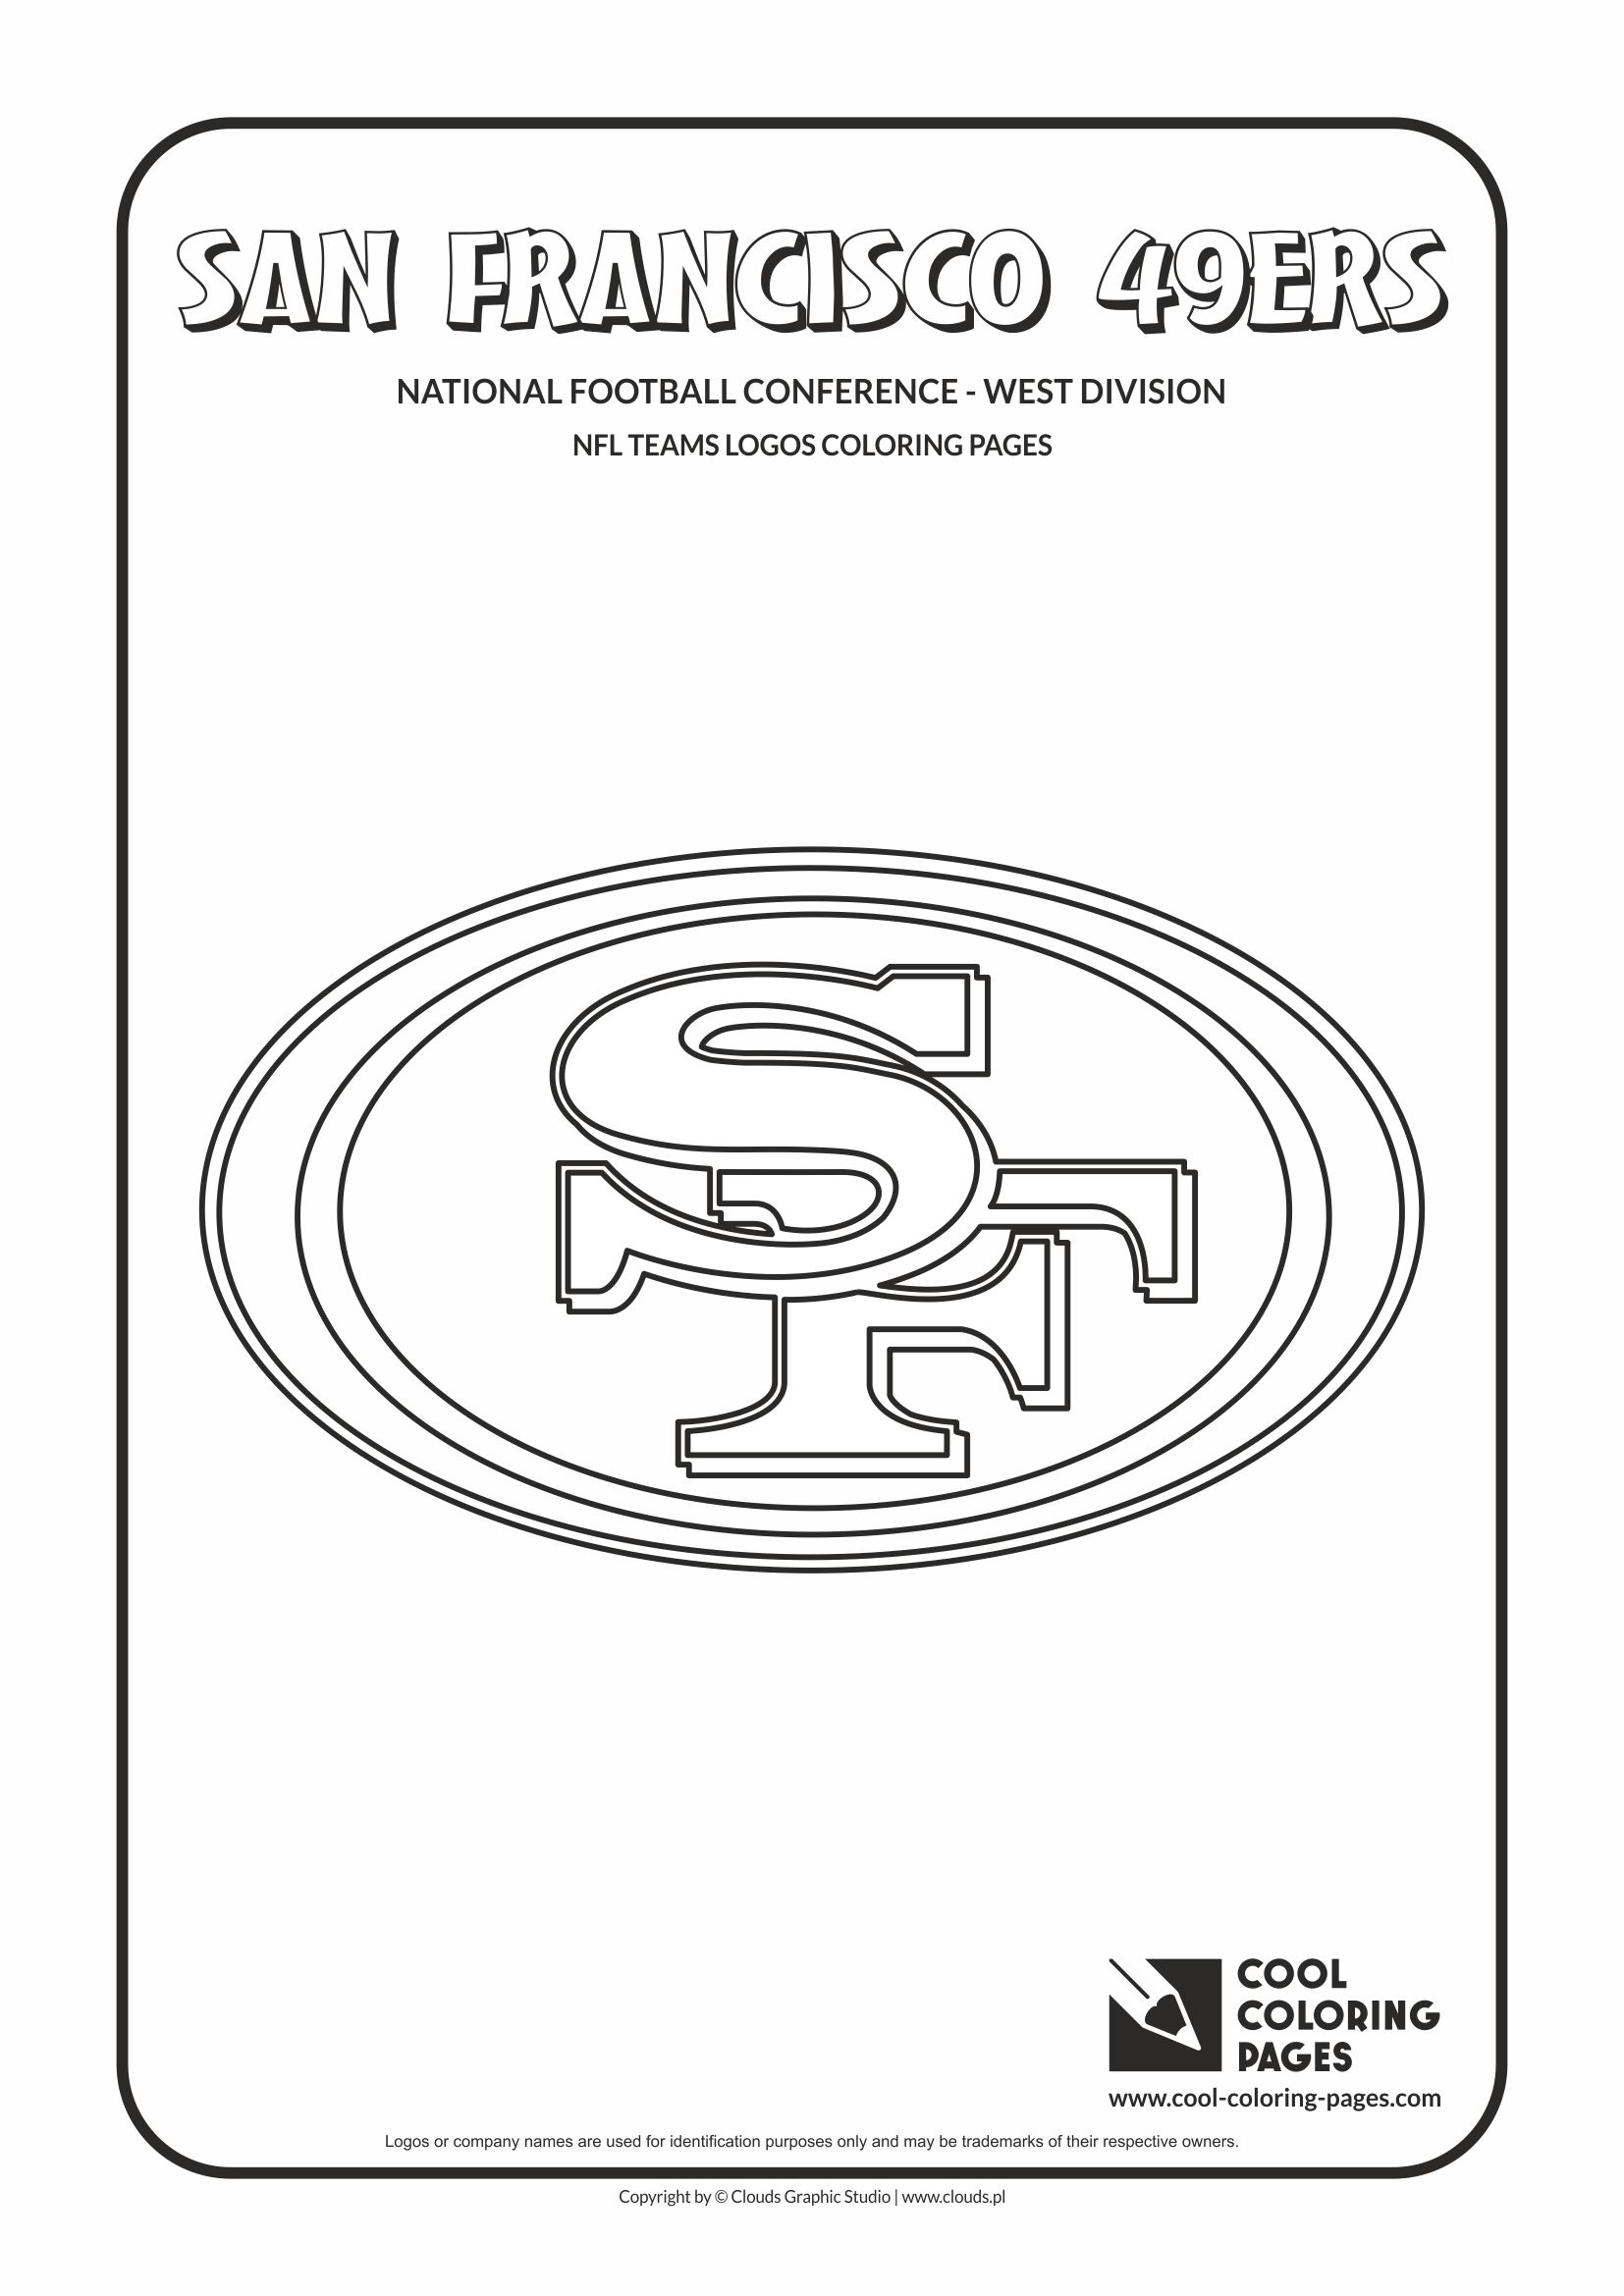 Cool coloring pages nfl teams logos coloring pages